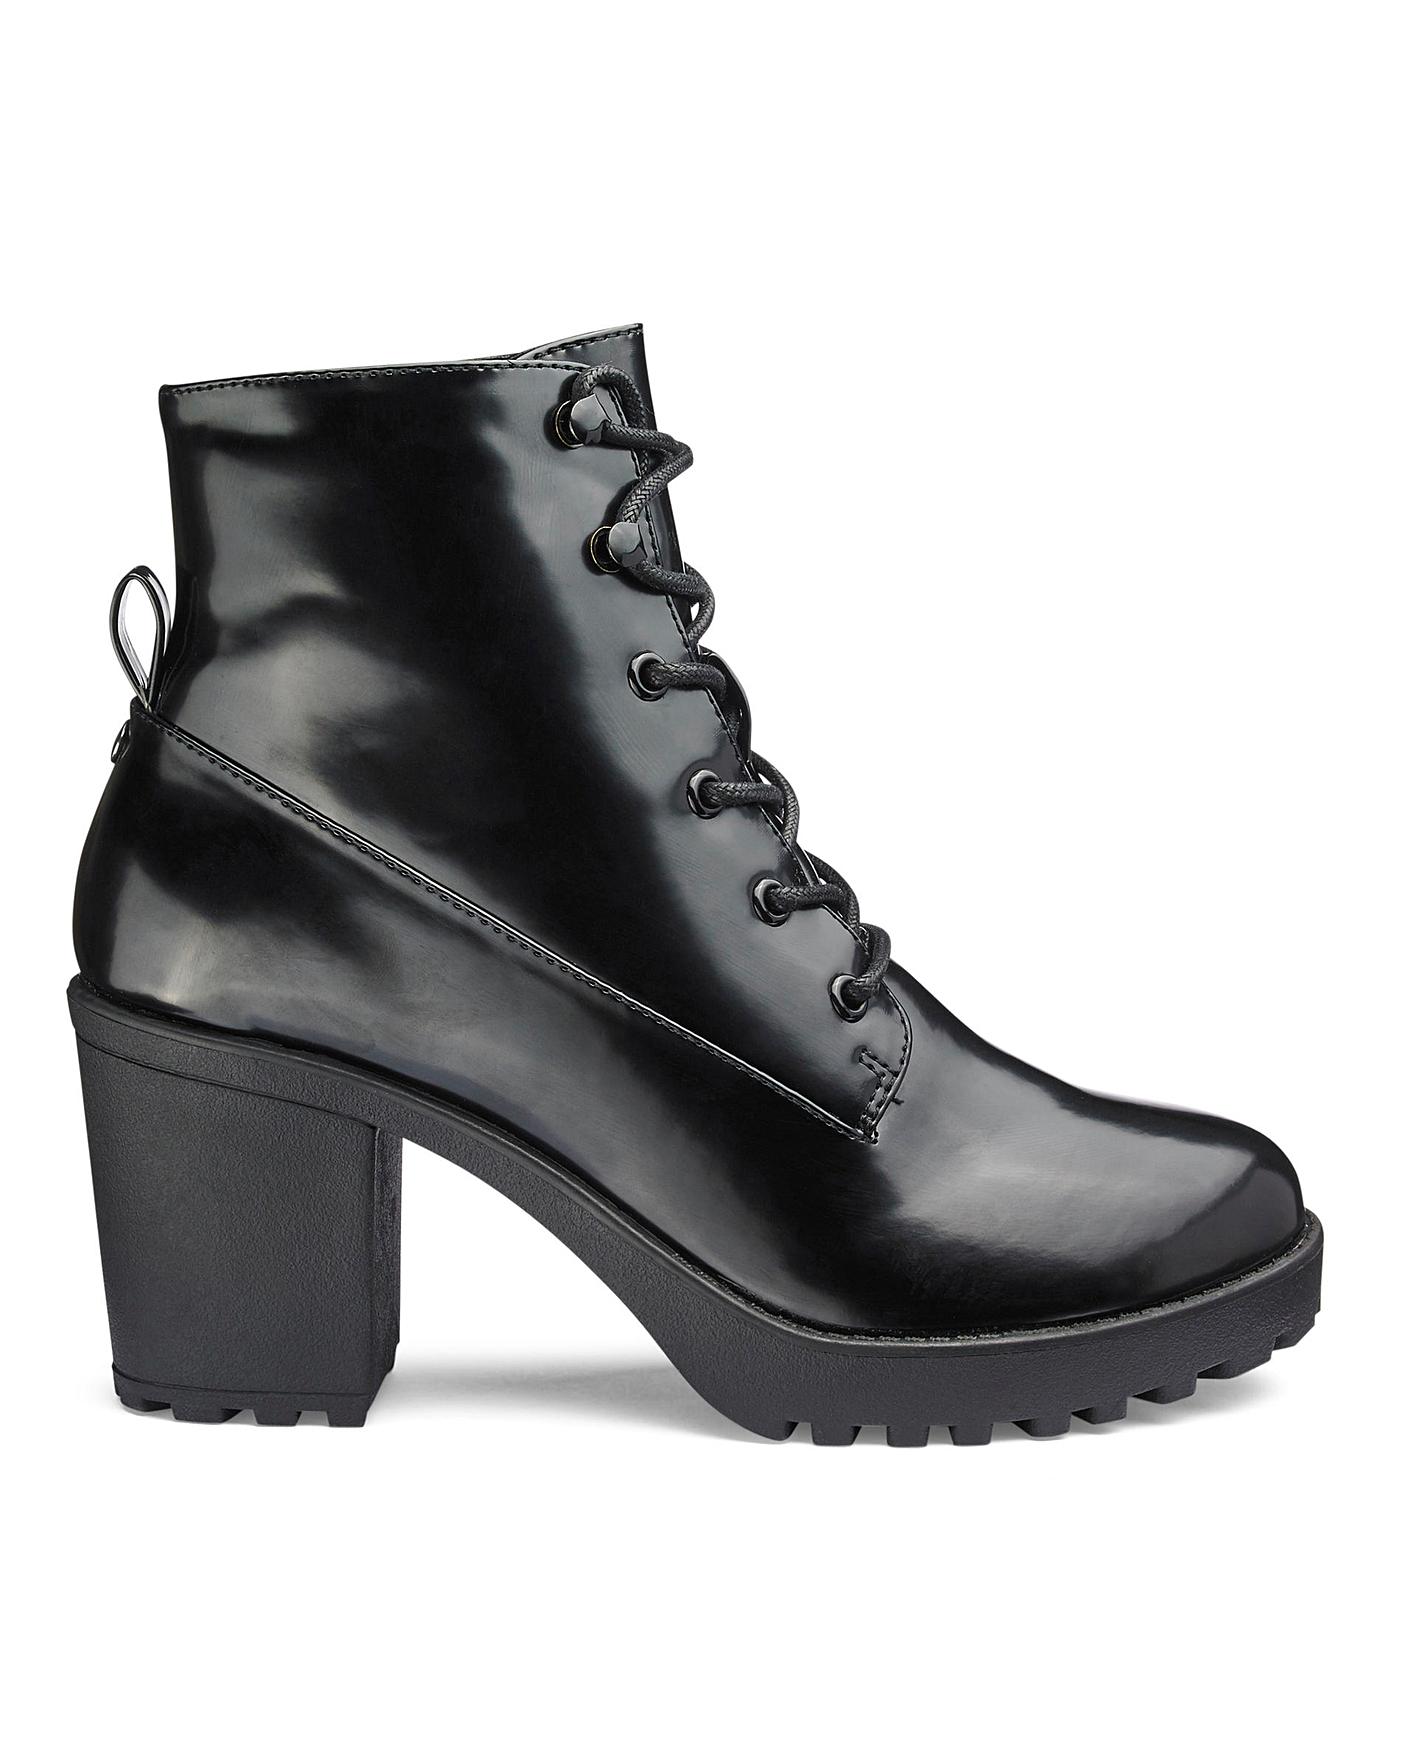 extra wide lace up boots